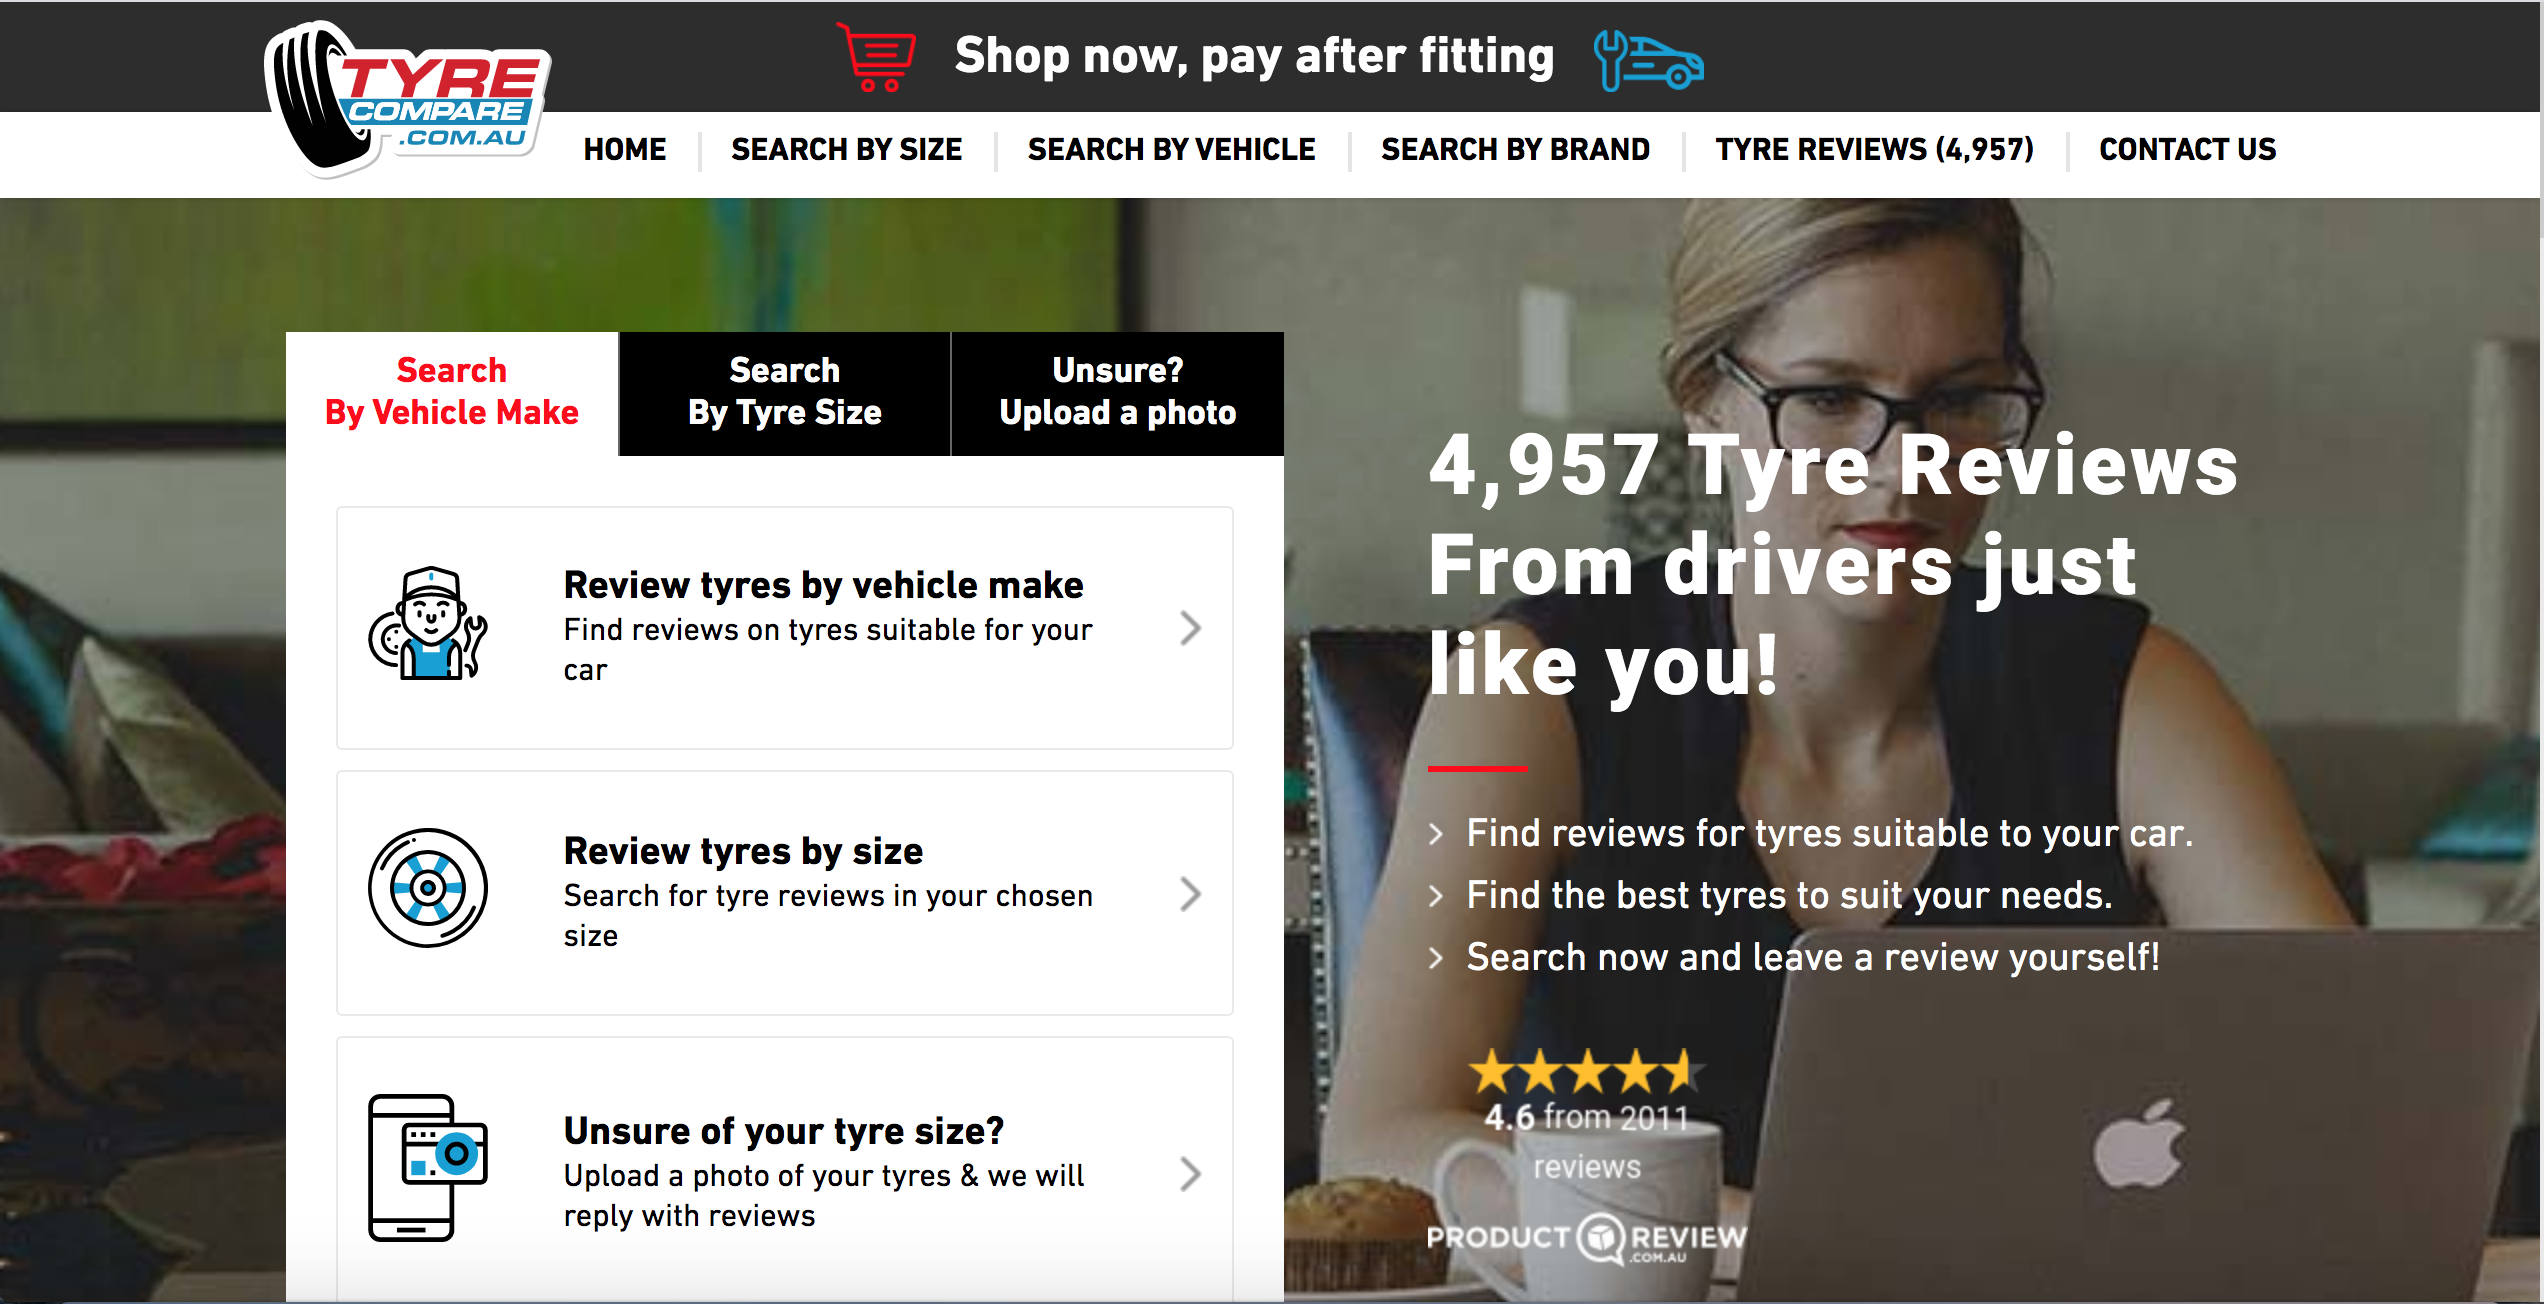 Finding the right tyres